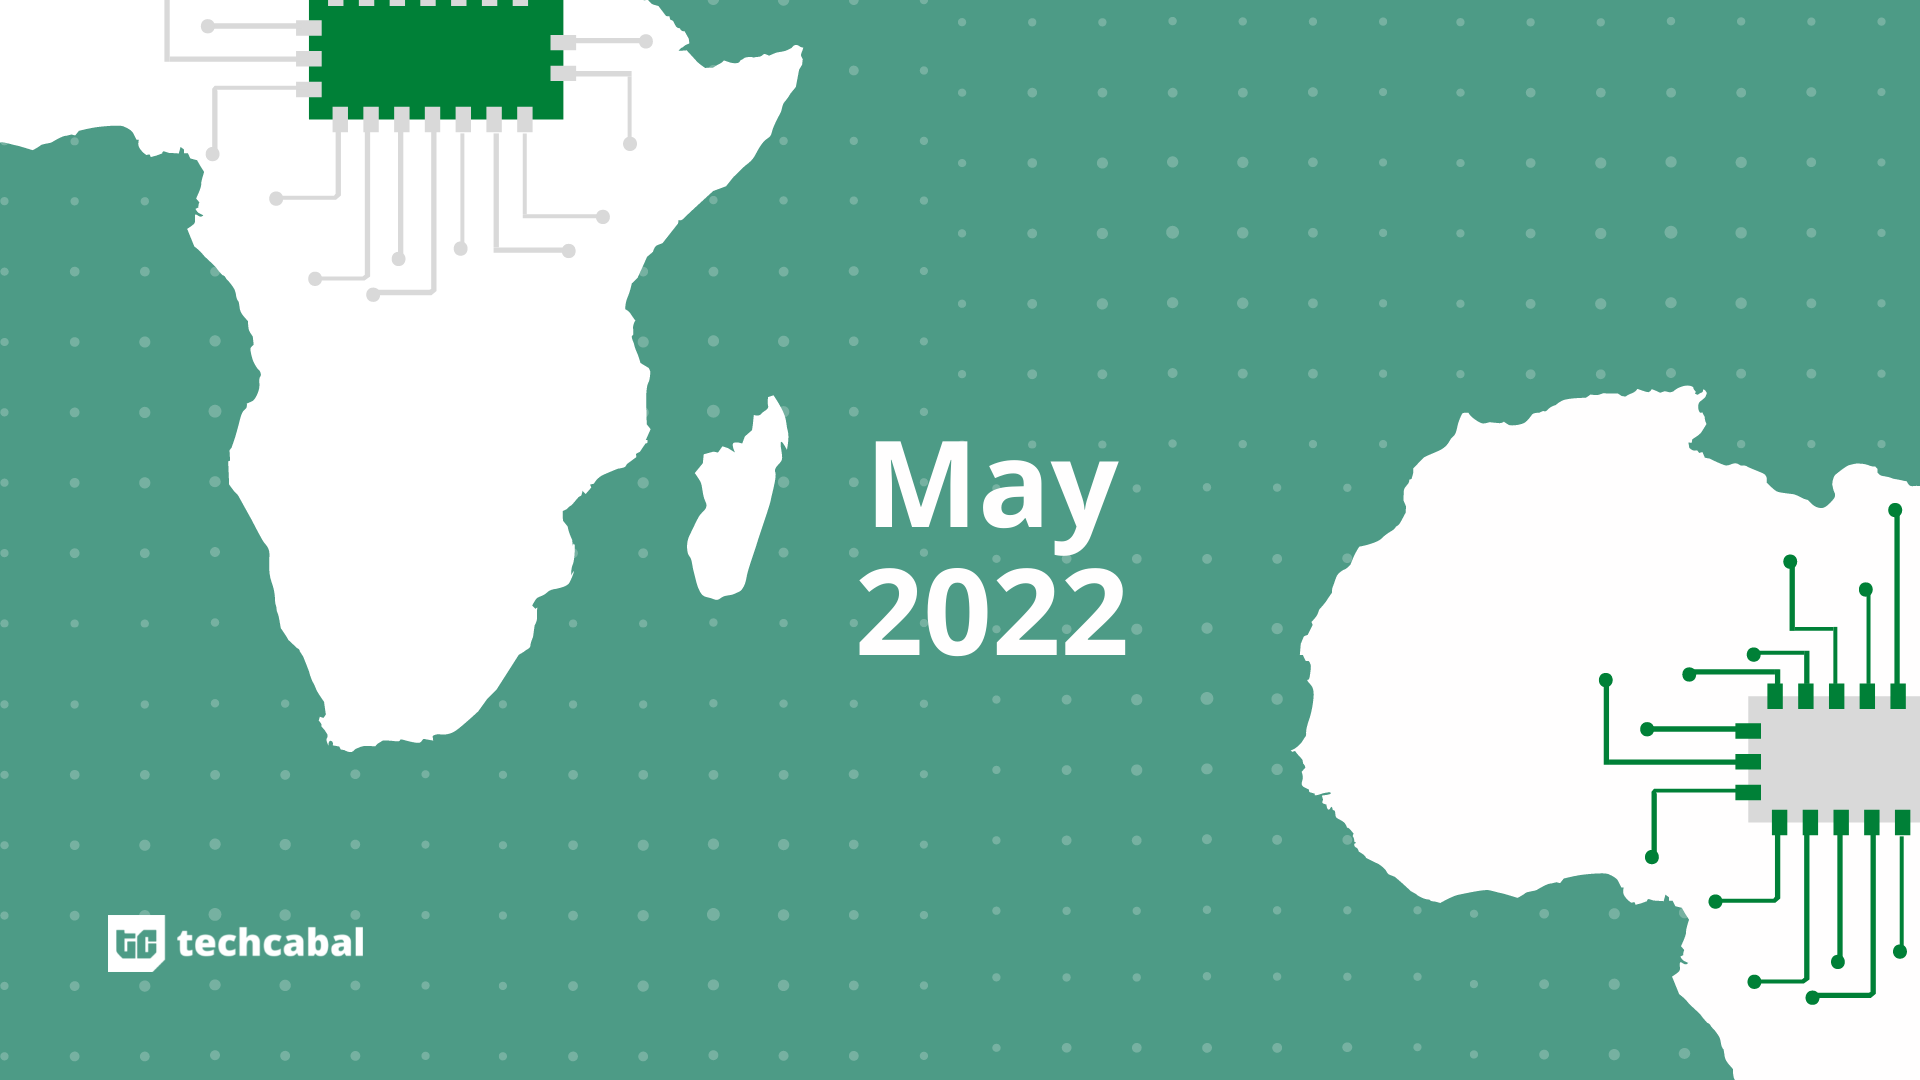 African tech may 2022